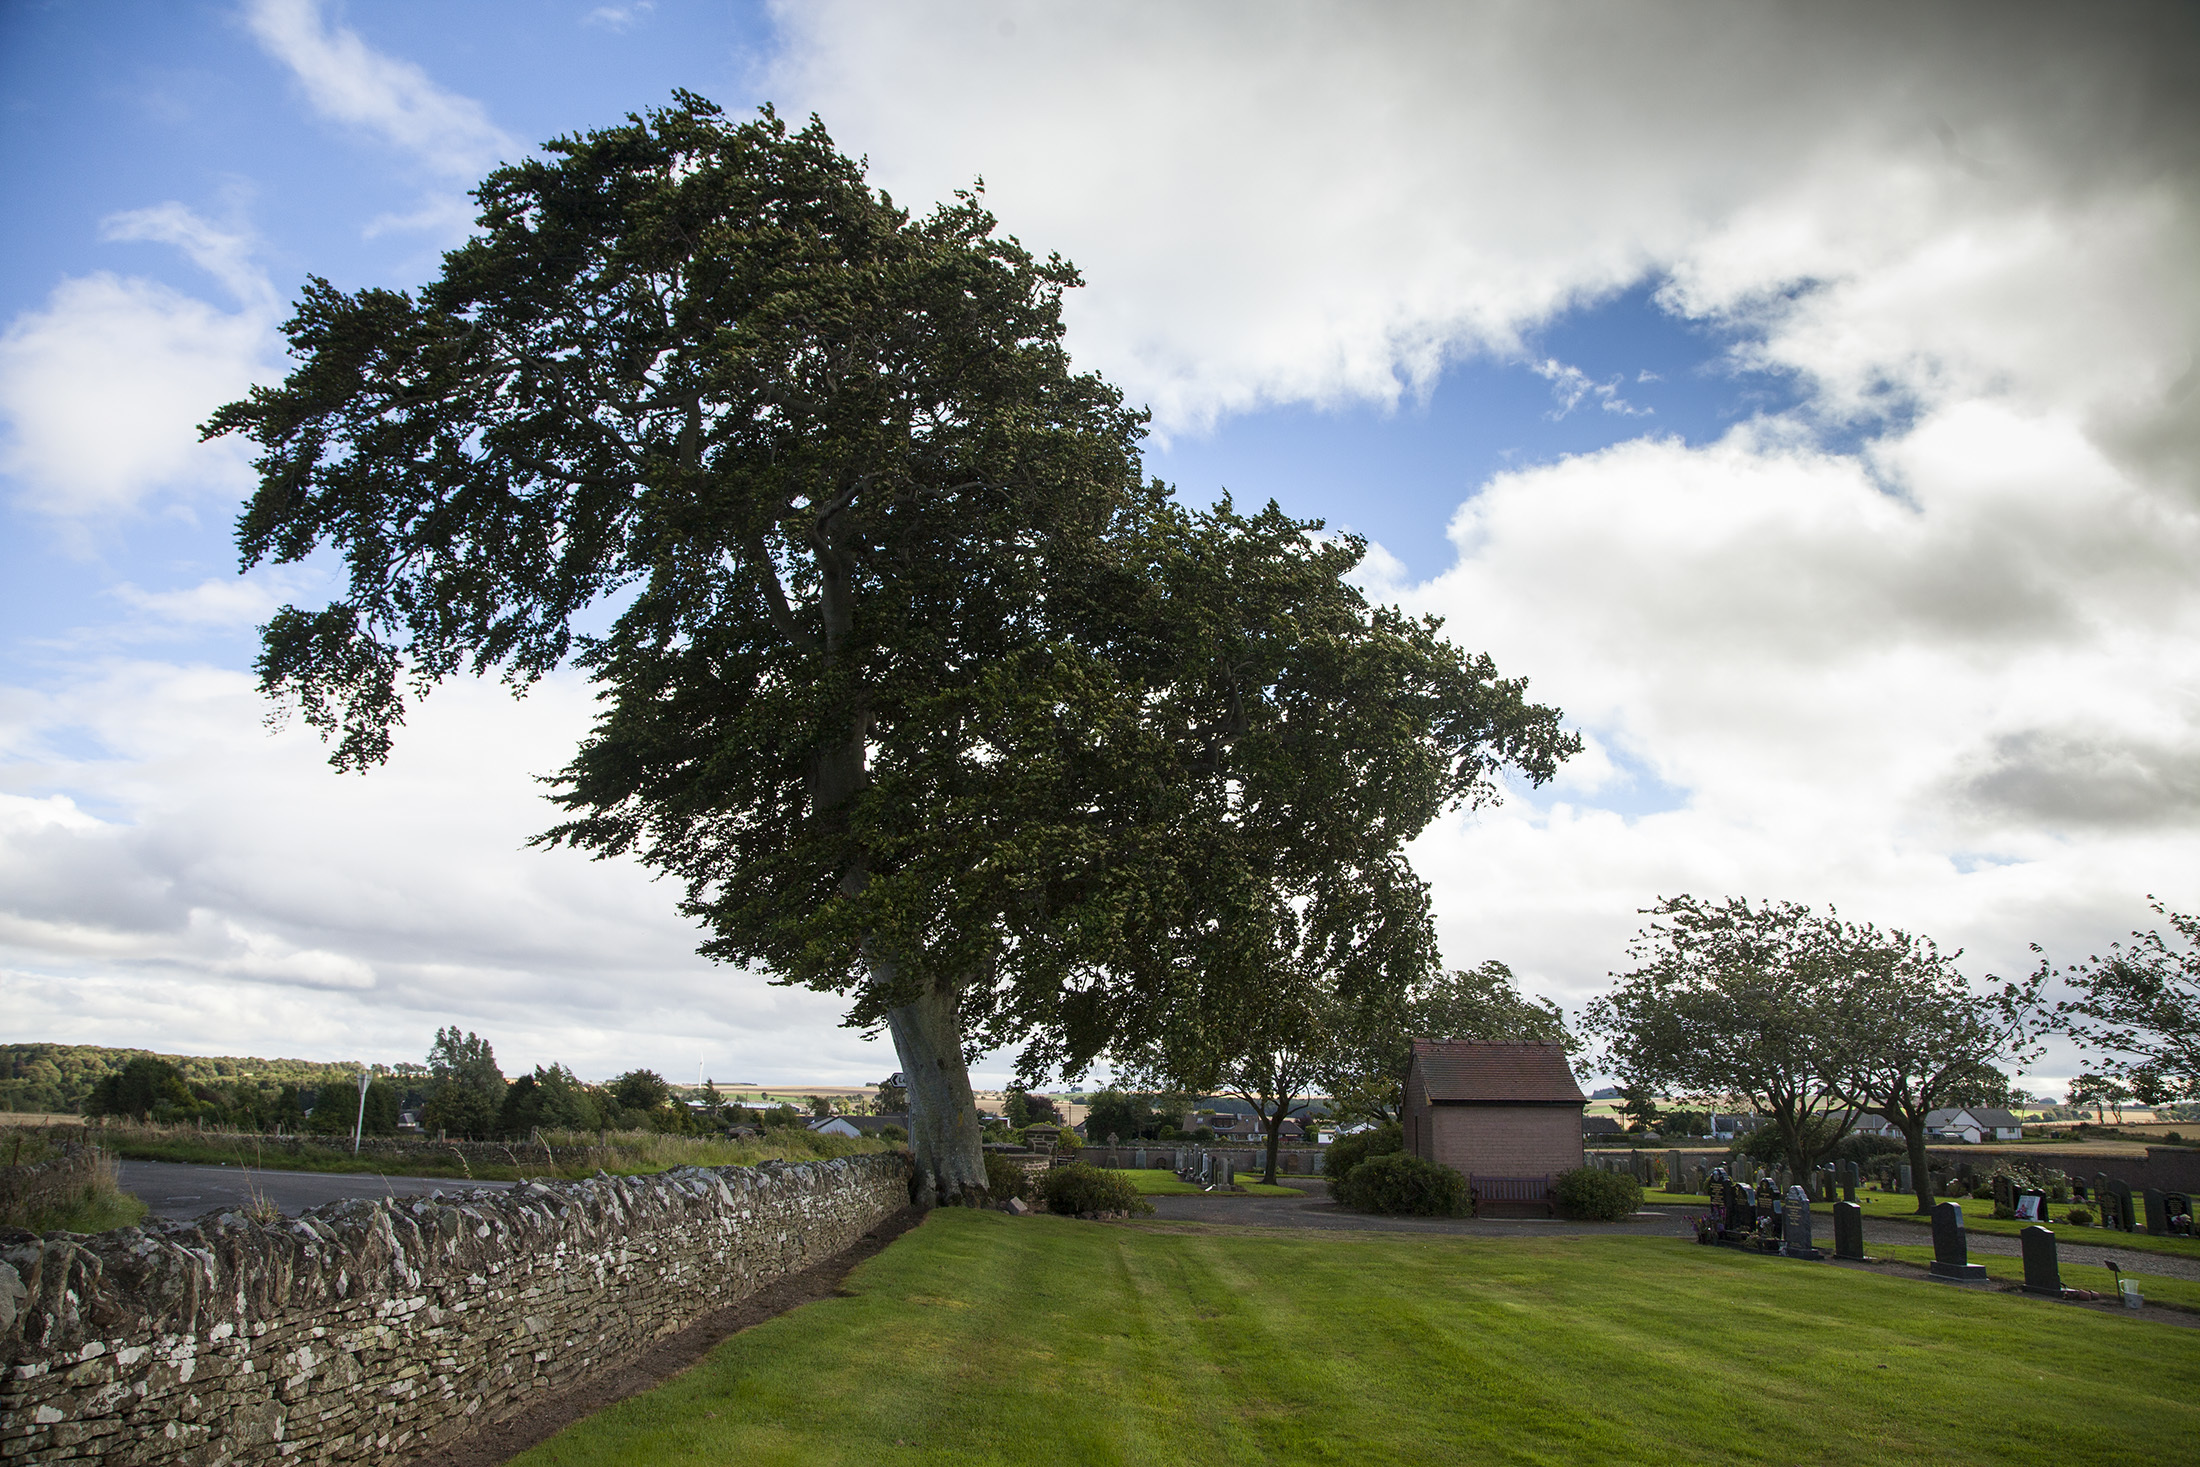 The Letham tree